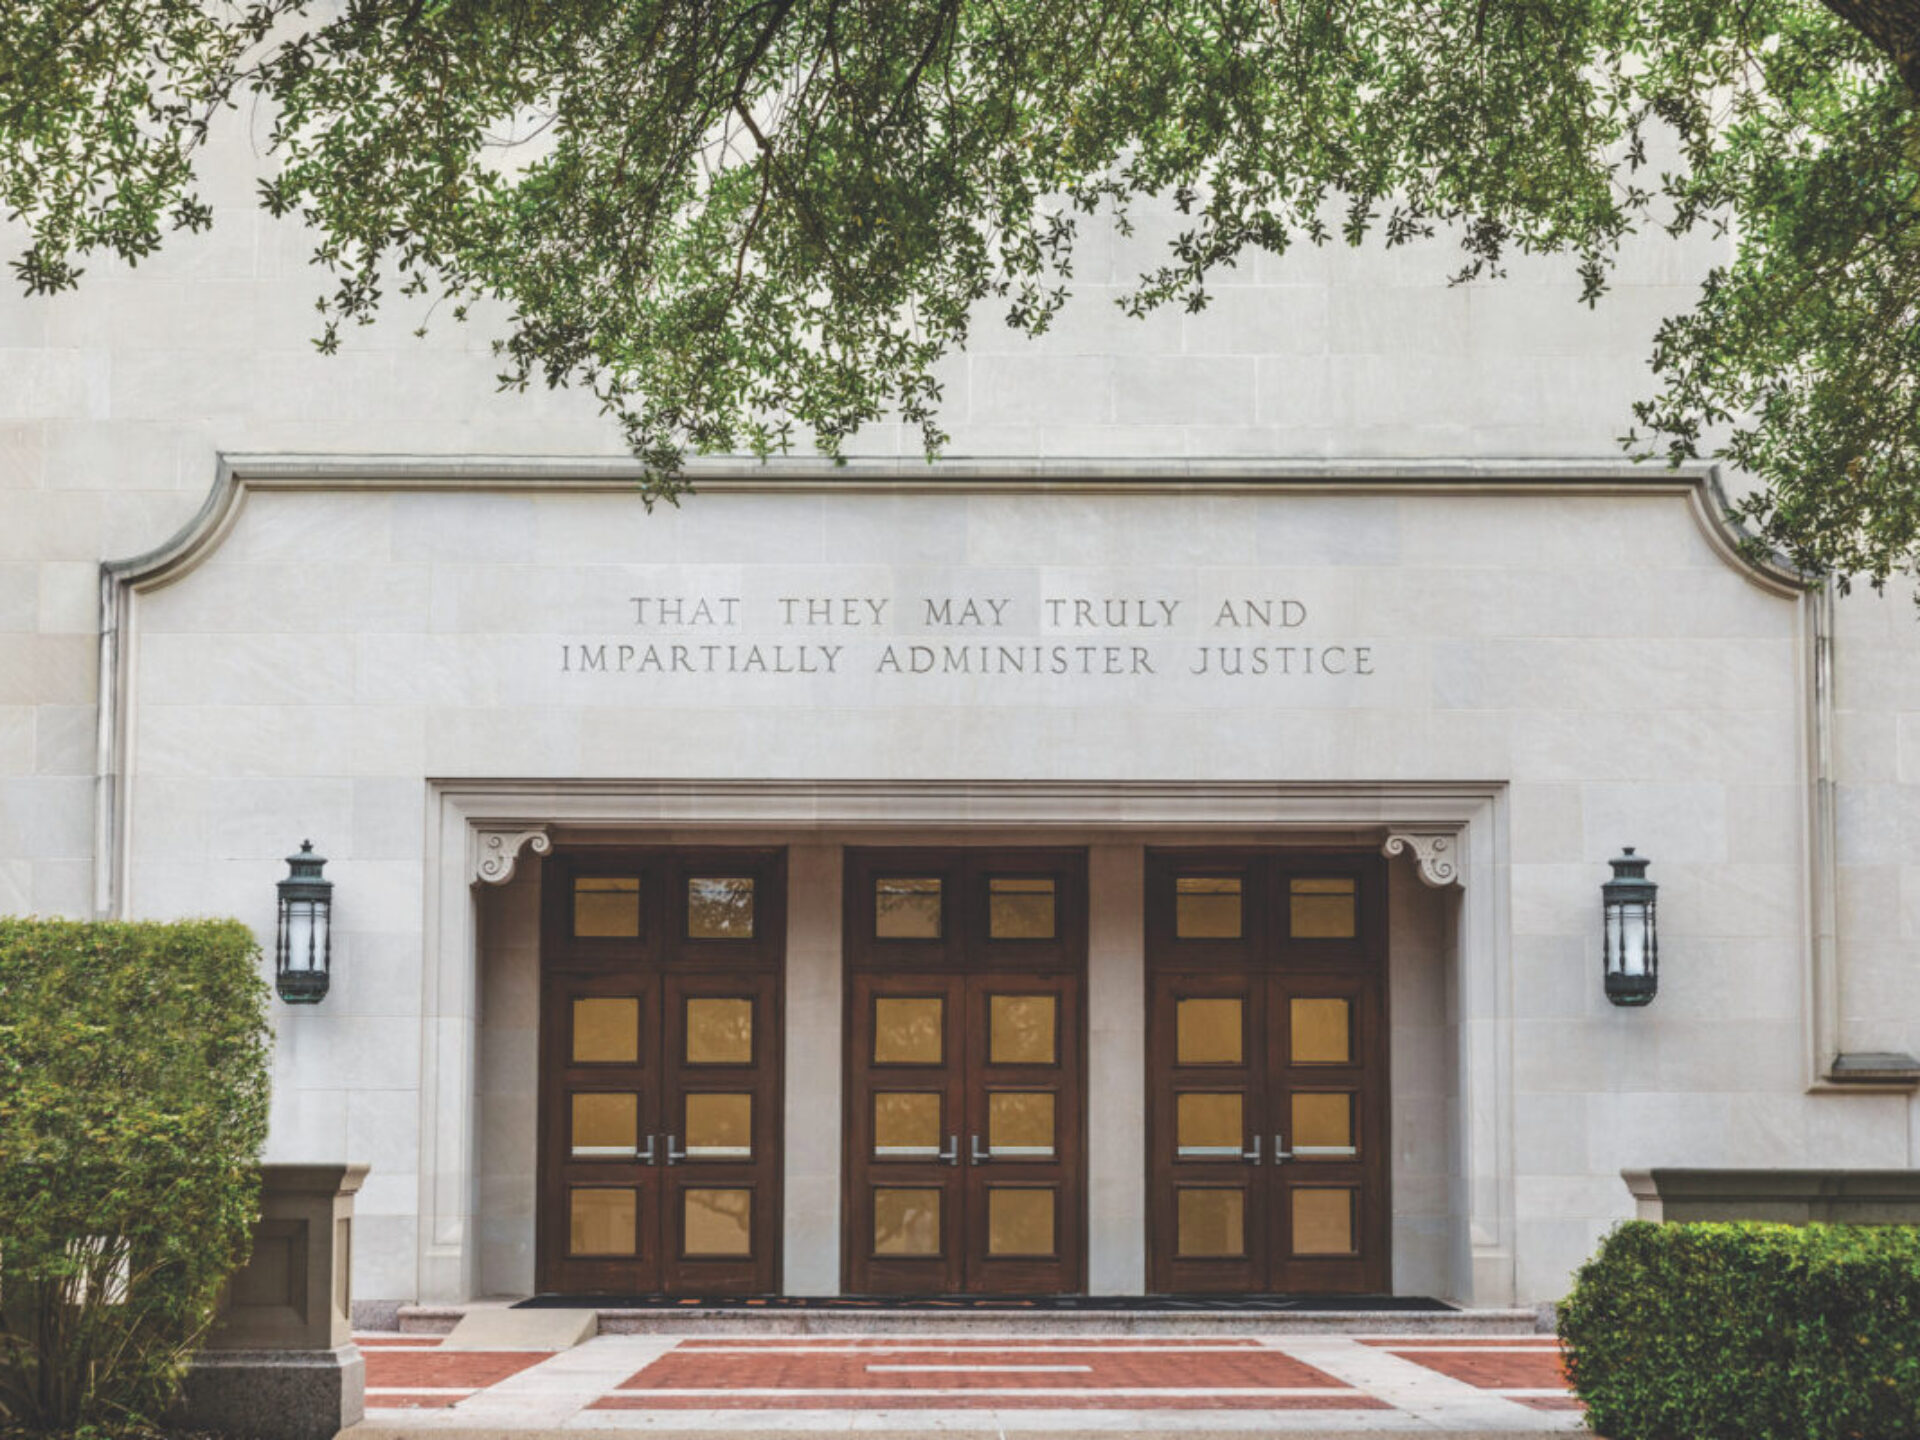 The exterior doors of Townes Hall at the University of Texas School of Law, with an inscription chiseled above: "That they may truly and impartially administer justice."